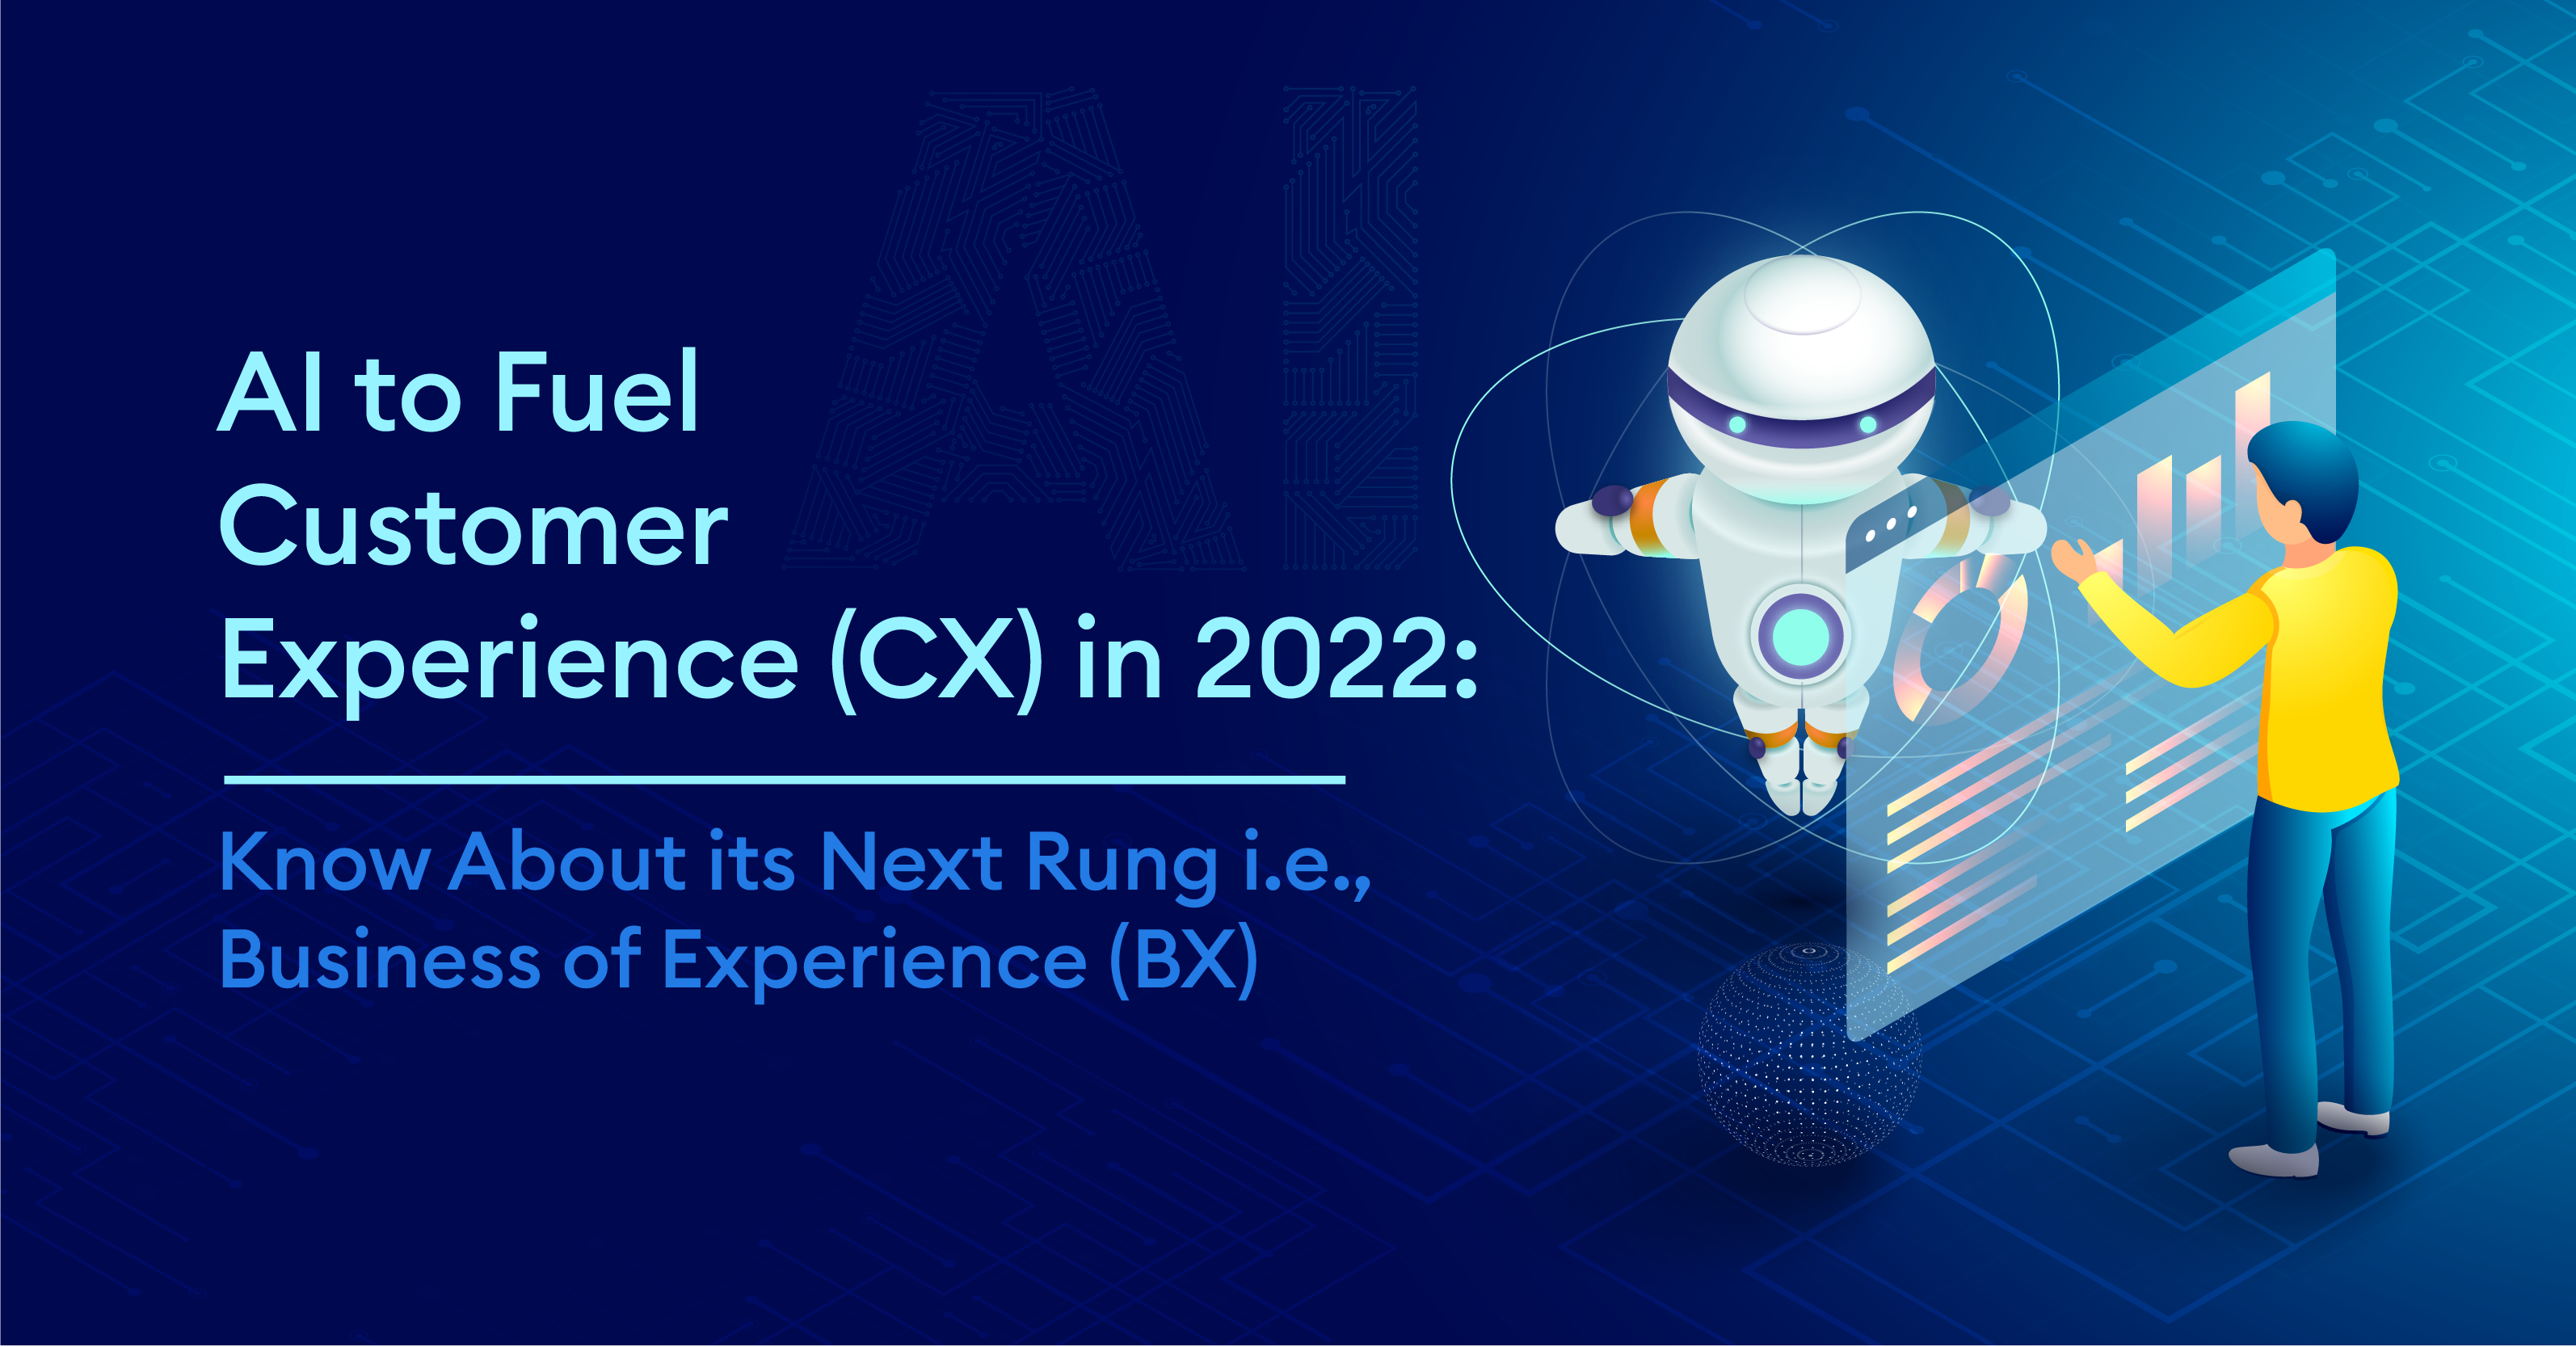 AI to Fuel Customer Experience (CX) in 2022: Know About its Next Rung